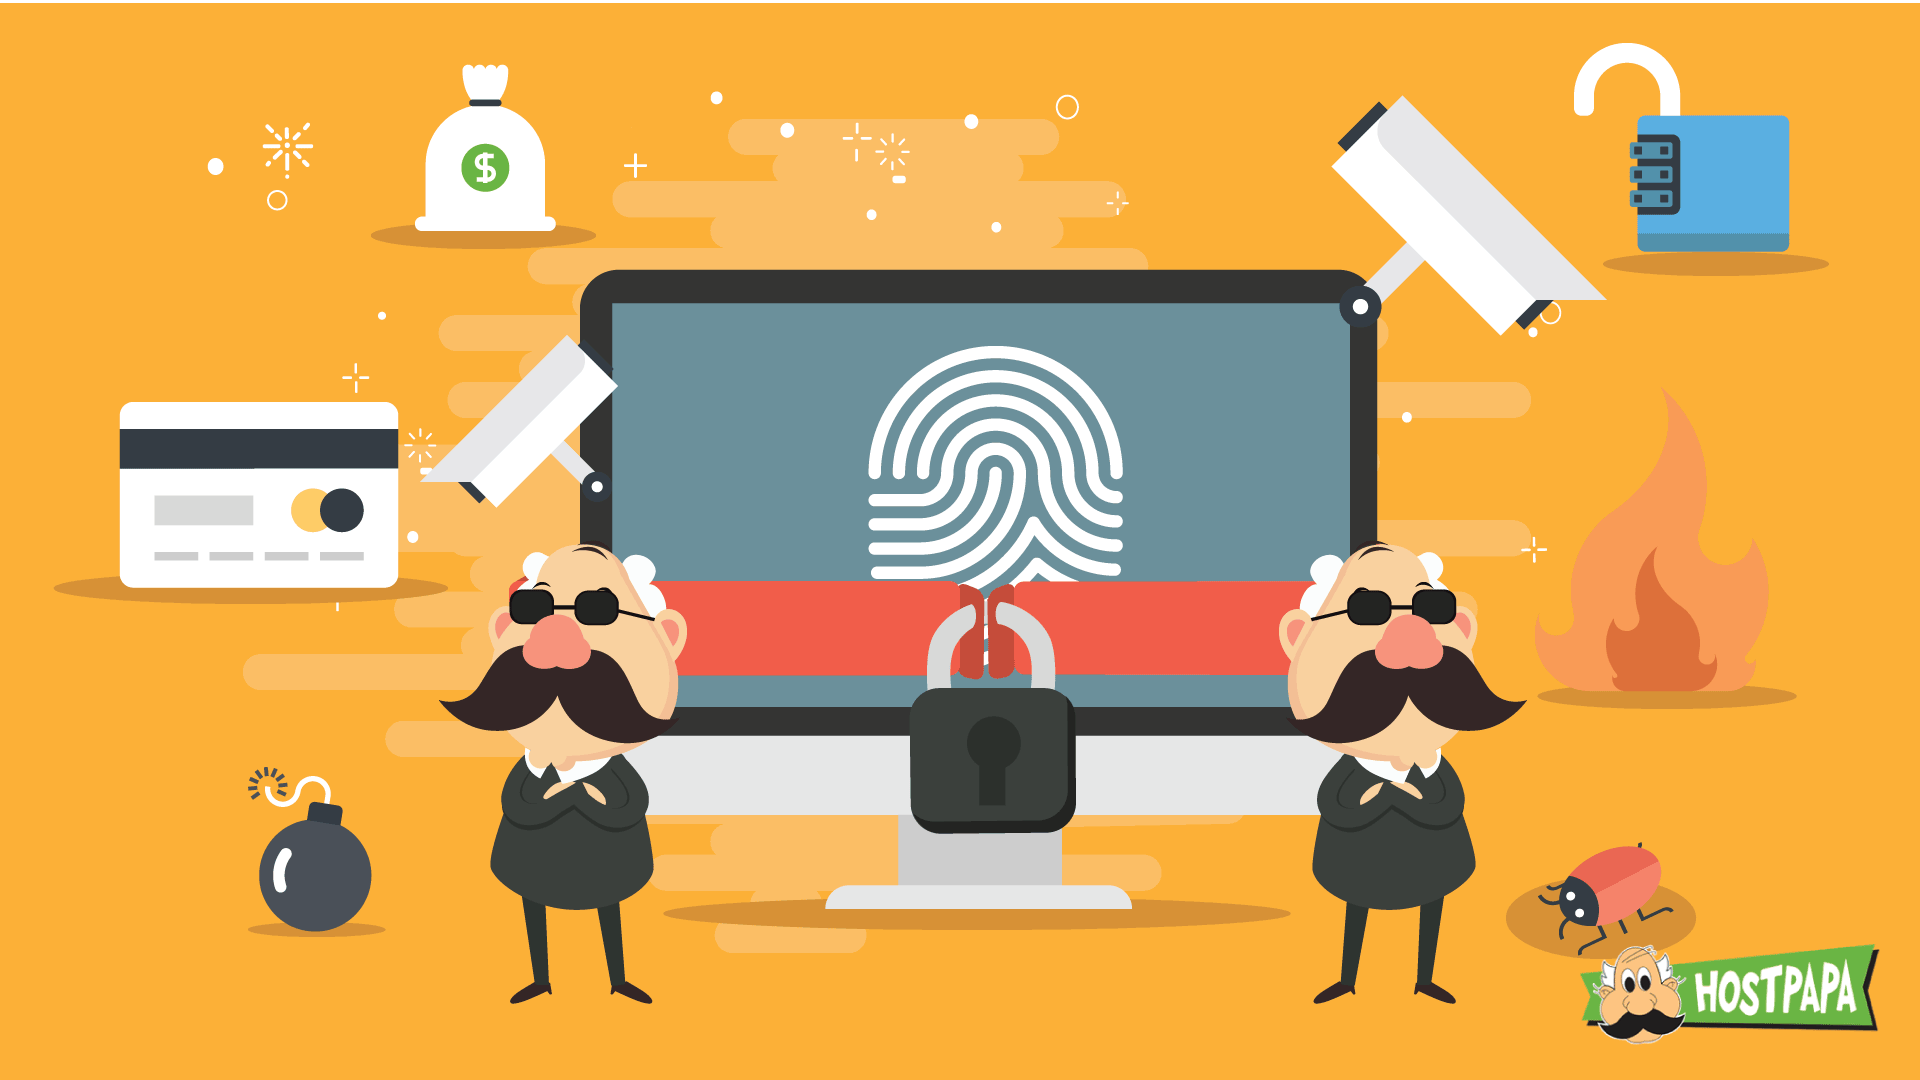 Website Security - Why You Should Care